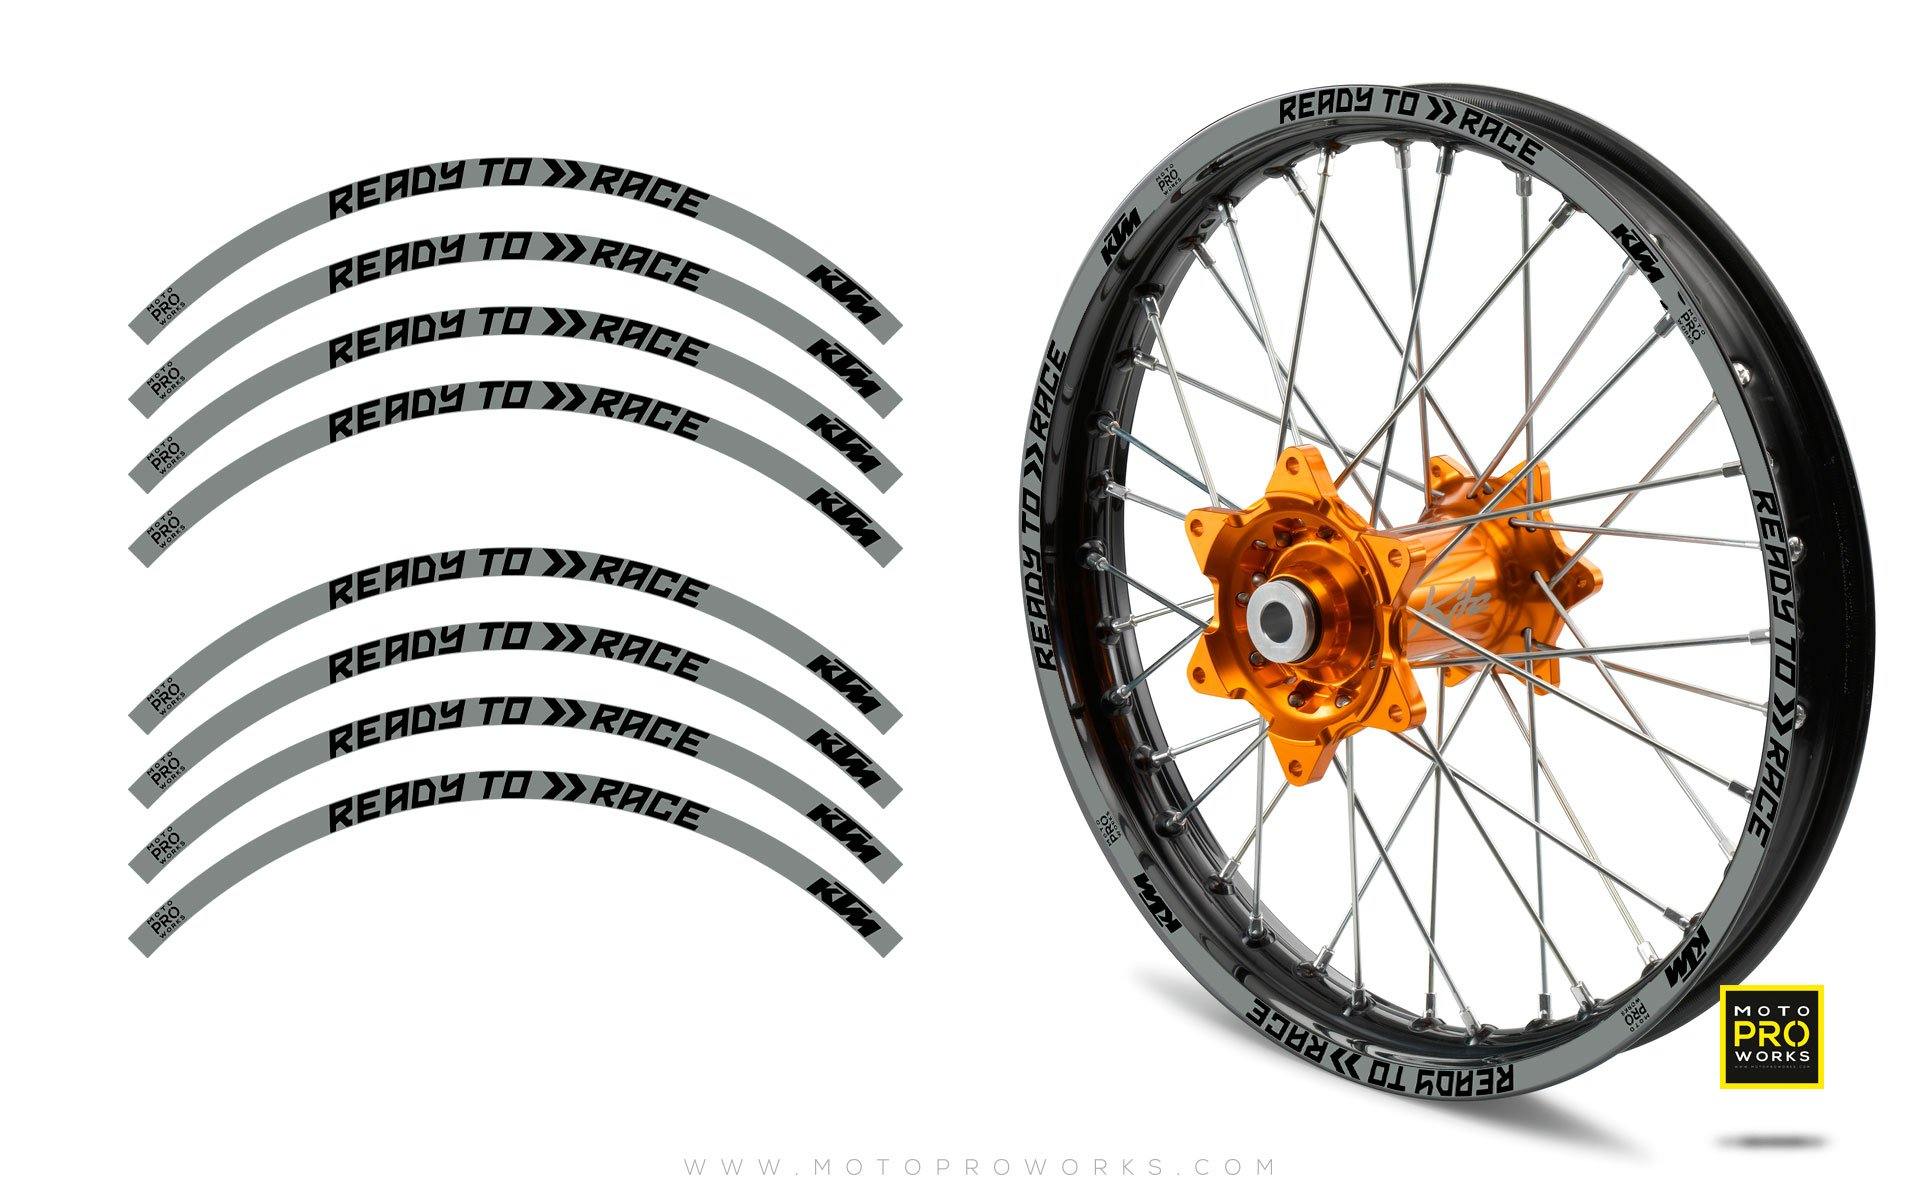 Rim Stripes - KTM "Ready To Race" (Armour) - MotoProWorks | Decals and Bike Graphic kit